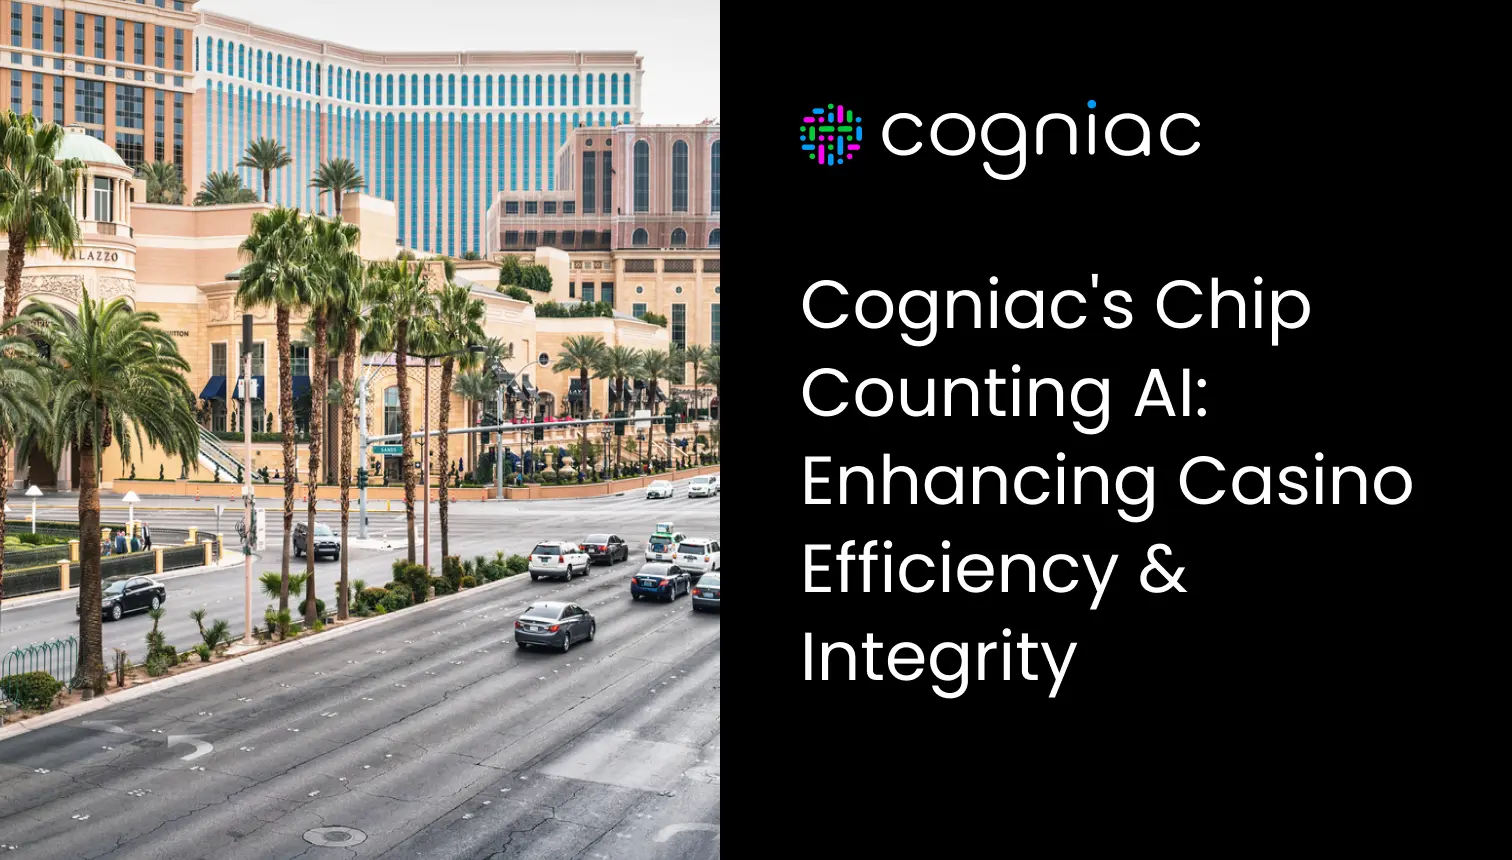 Cogniac’s chip counting technology: a game changer for casinos